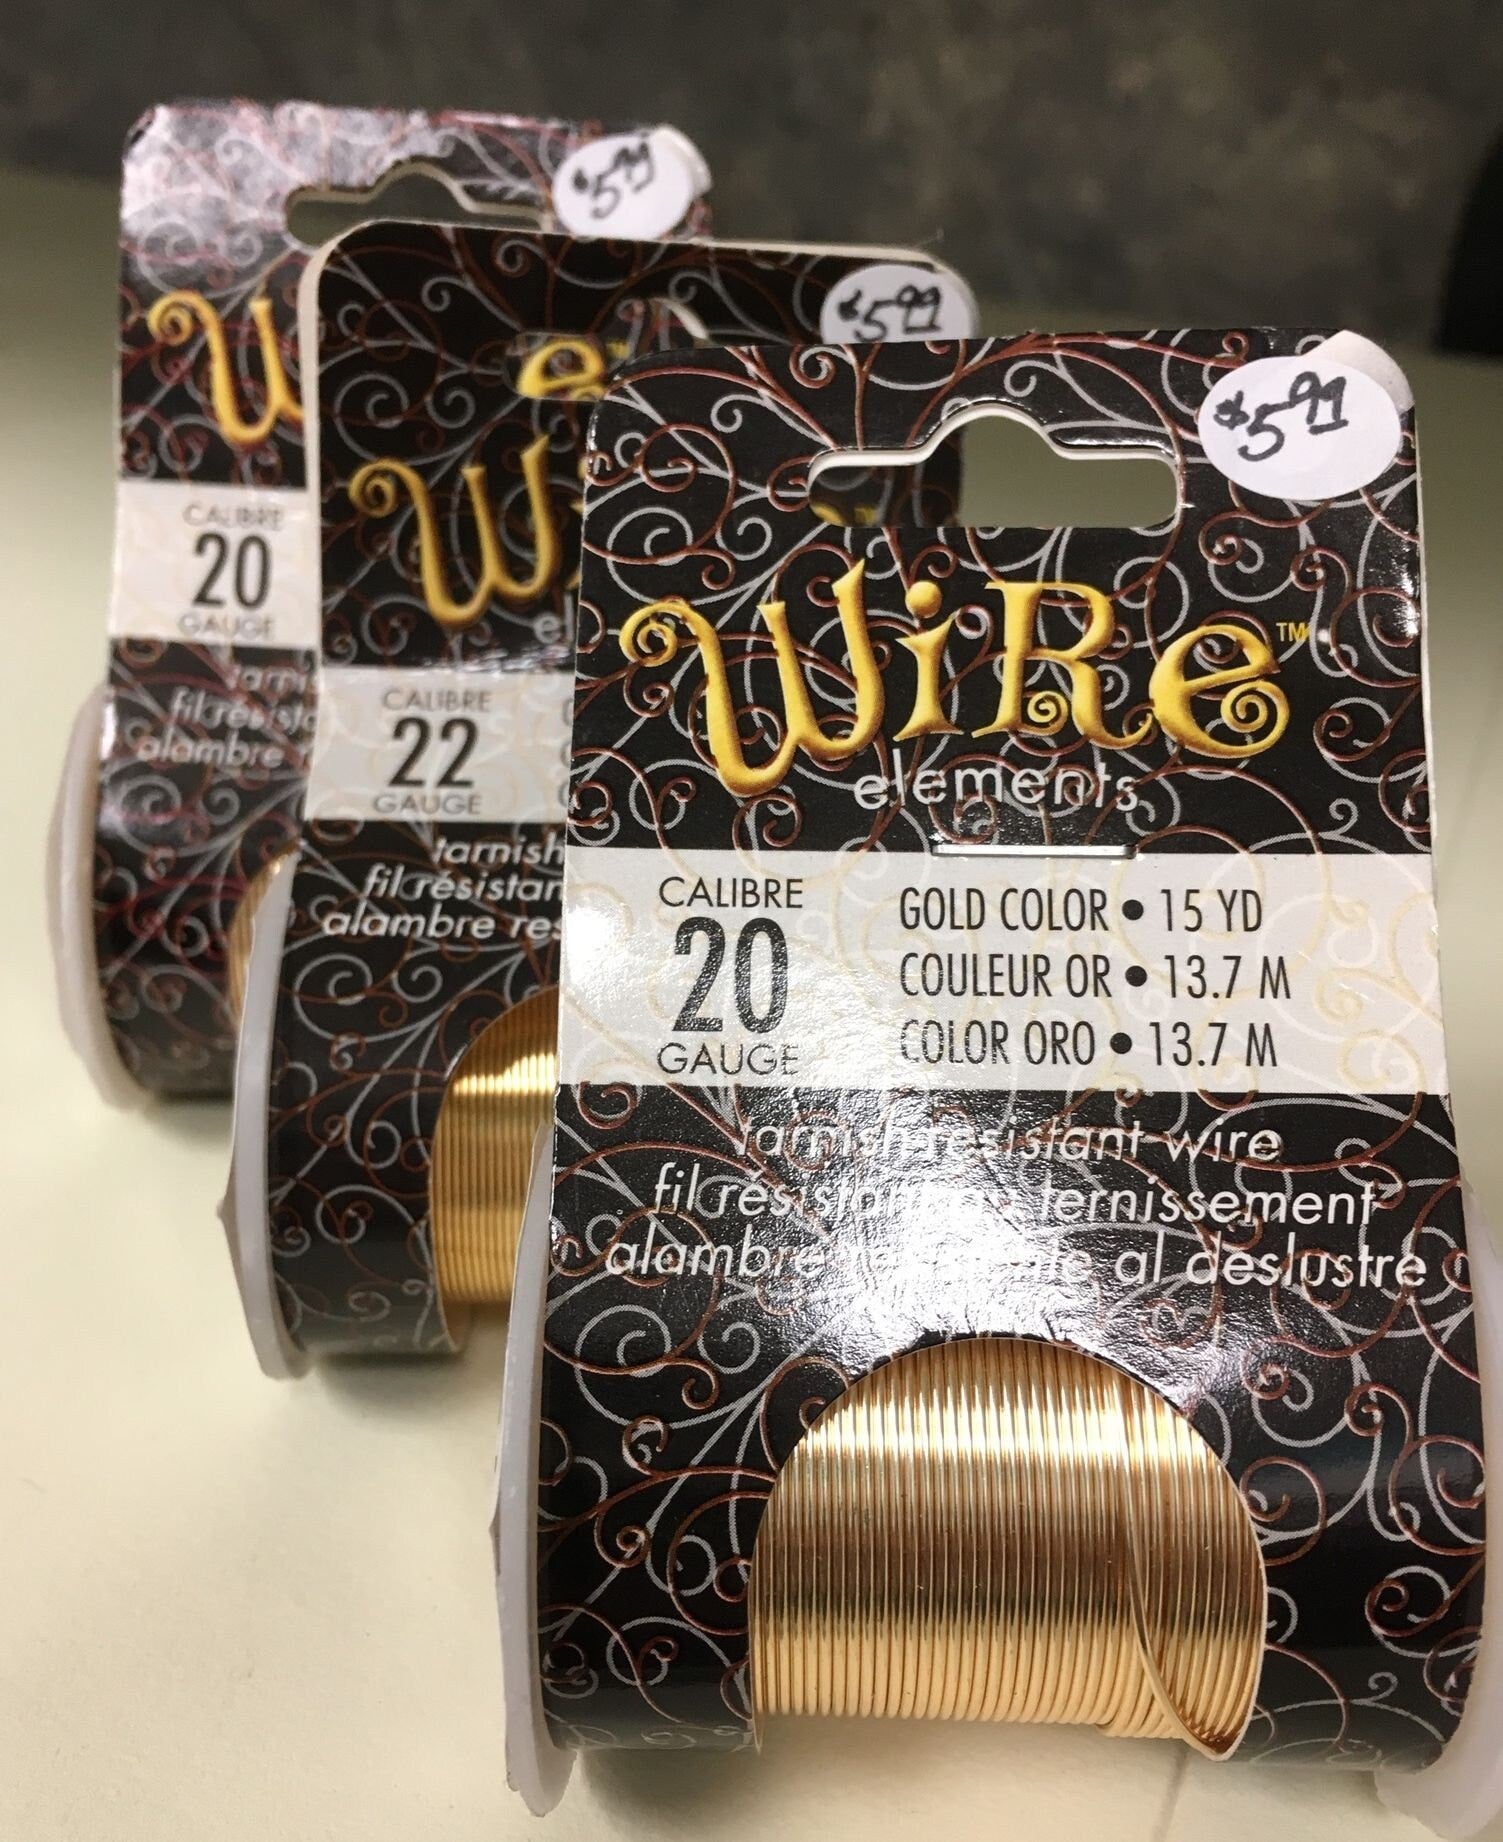 Copper Wire 22 Gauge 10 Yards Gold Color